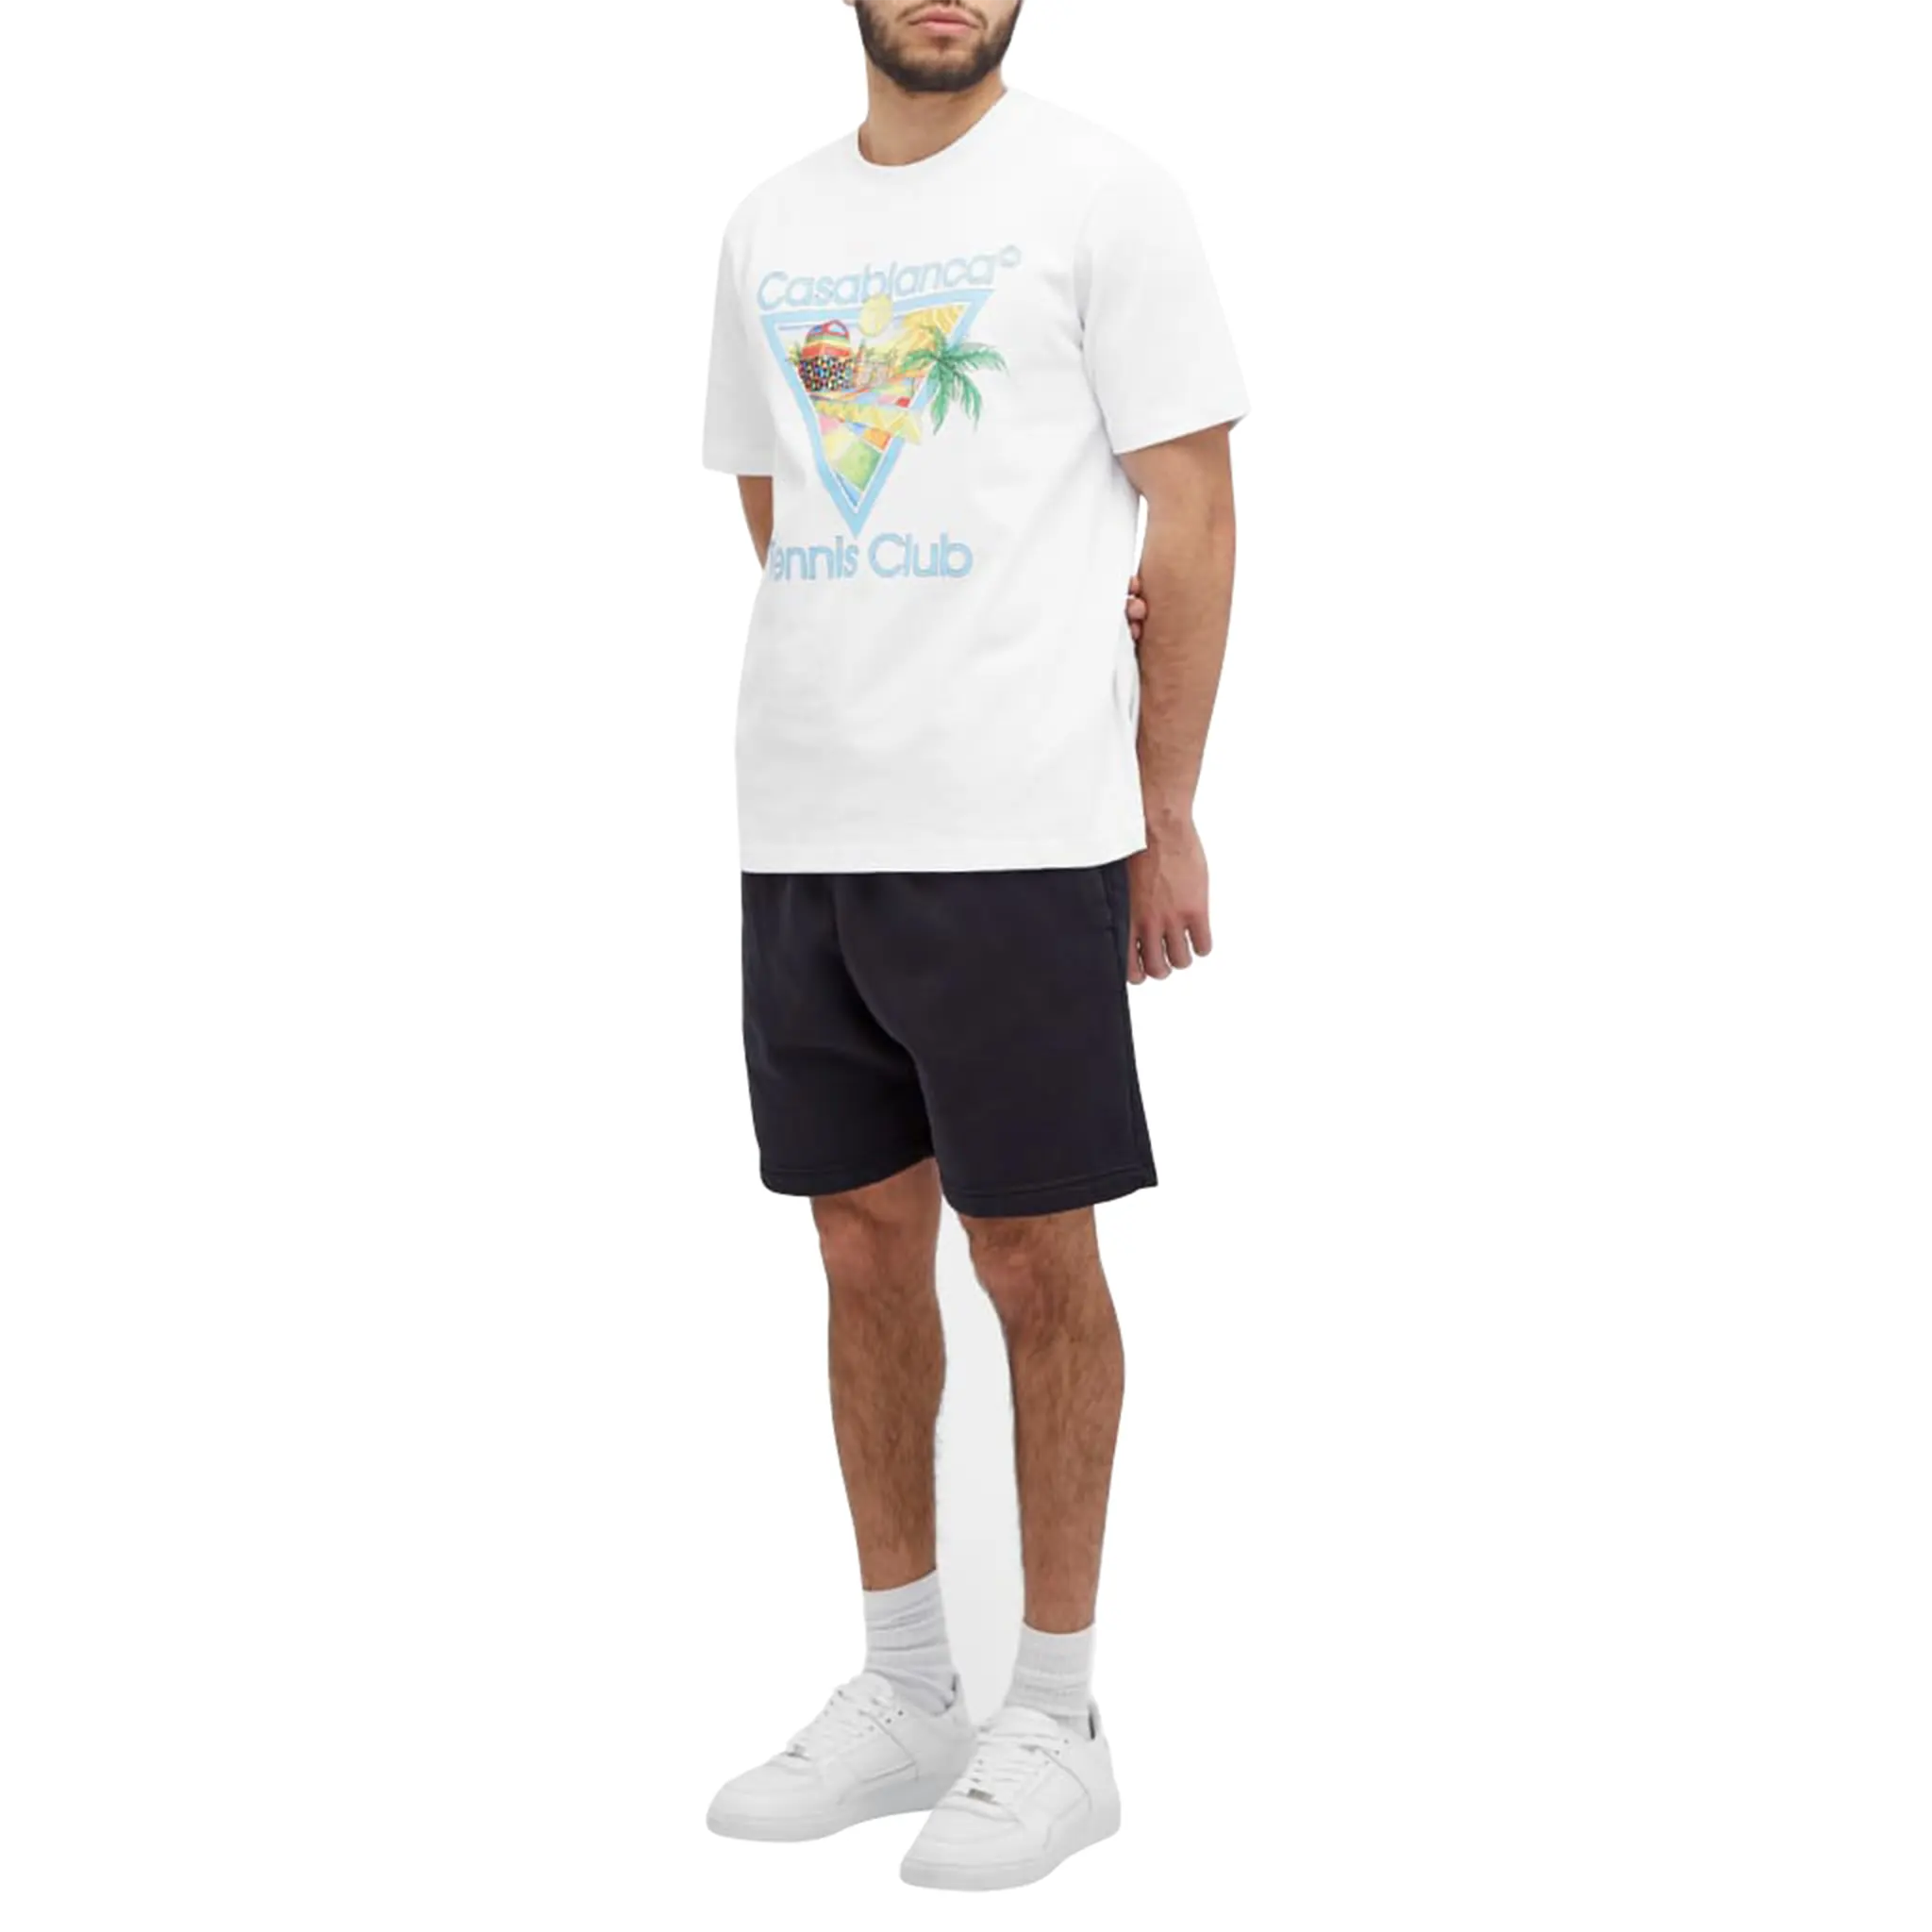 Model view of Casablanca Afro Cubism Tennis Club White T Shirt MS24-JTS-001-05